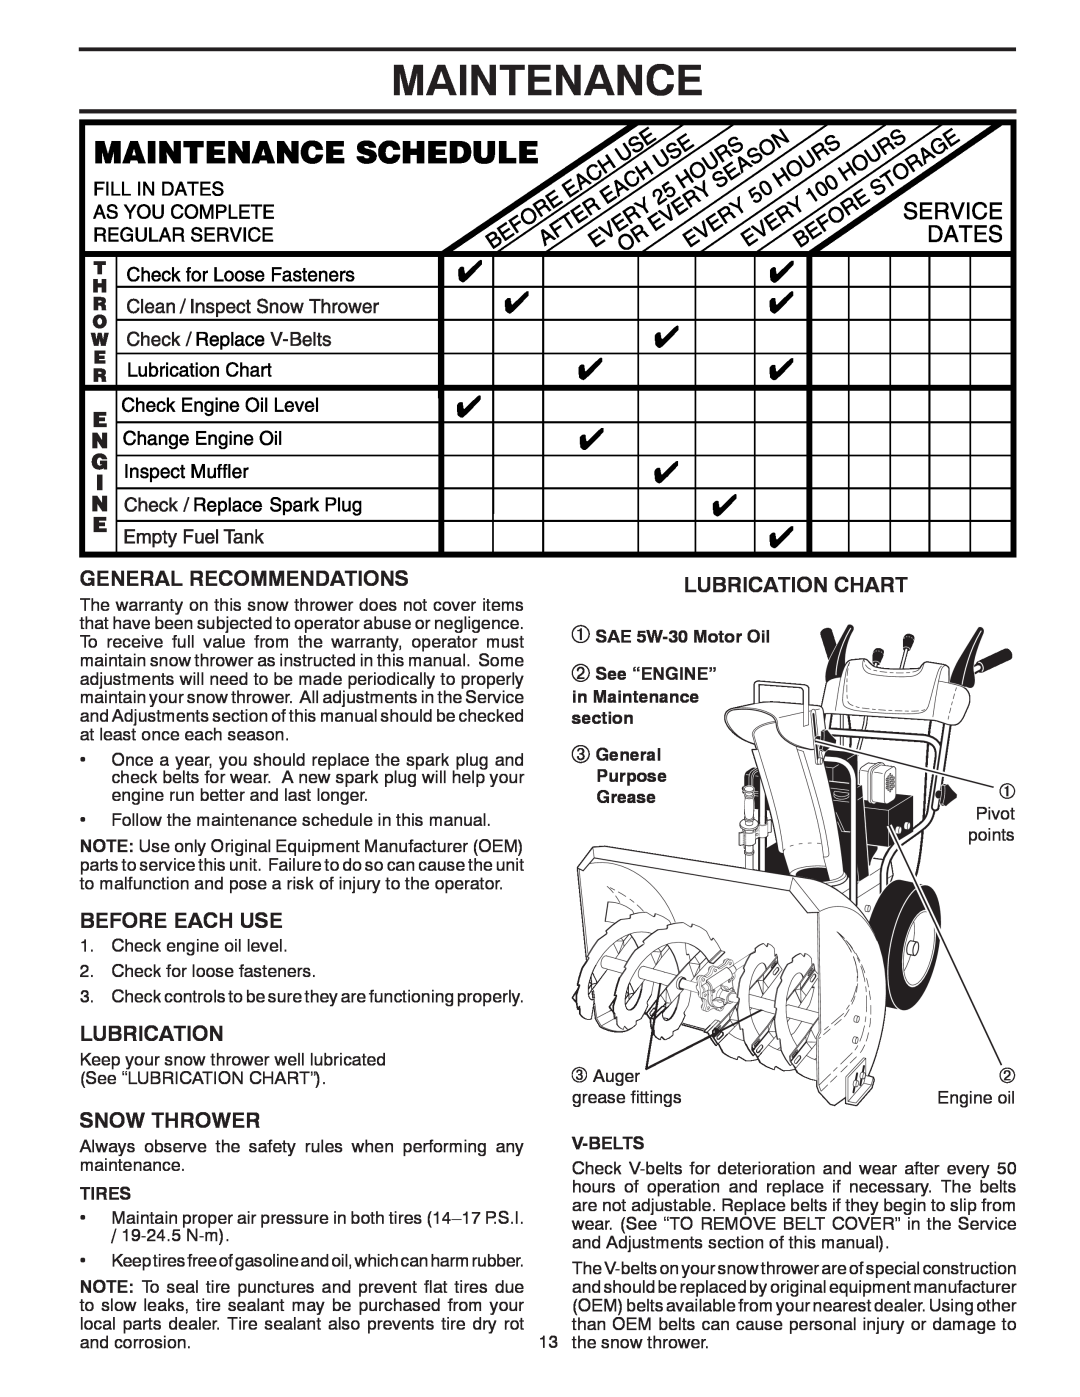 Poulan 416810 Maintenance, General Recommendations, Before Each Use, Snow Thrower, Lubrication Chart, Tires, V-Belts 